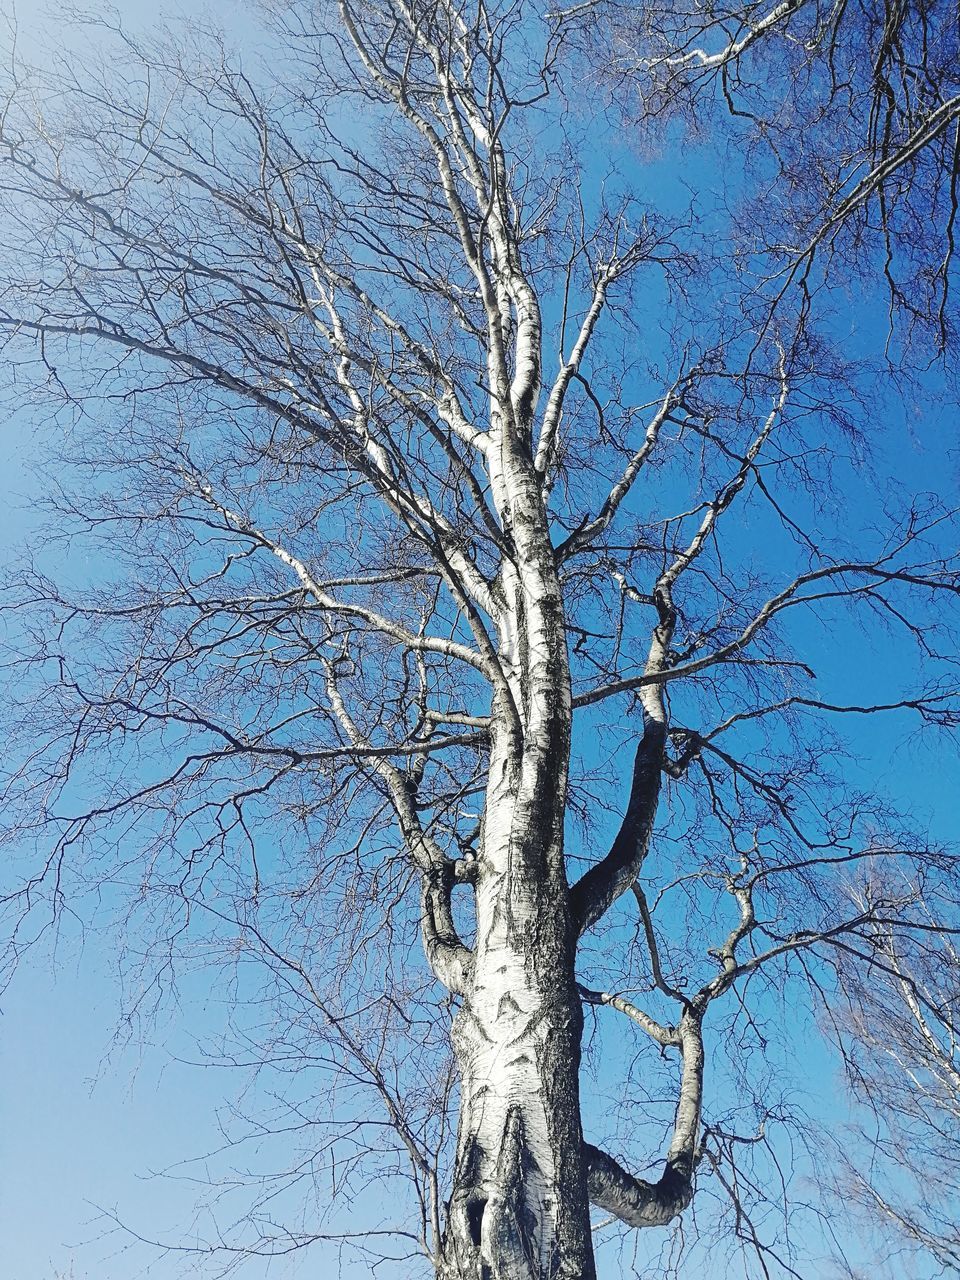 tree, bare tree, sky, branch, low angle view, plant, tranquility, nature, tree trunk, trunk, blue, beauty in nature, no people, day, outdoors, scenics - nature, clear sky, dead plant, growth, winter, tree canopy